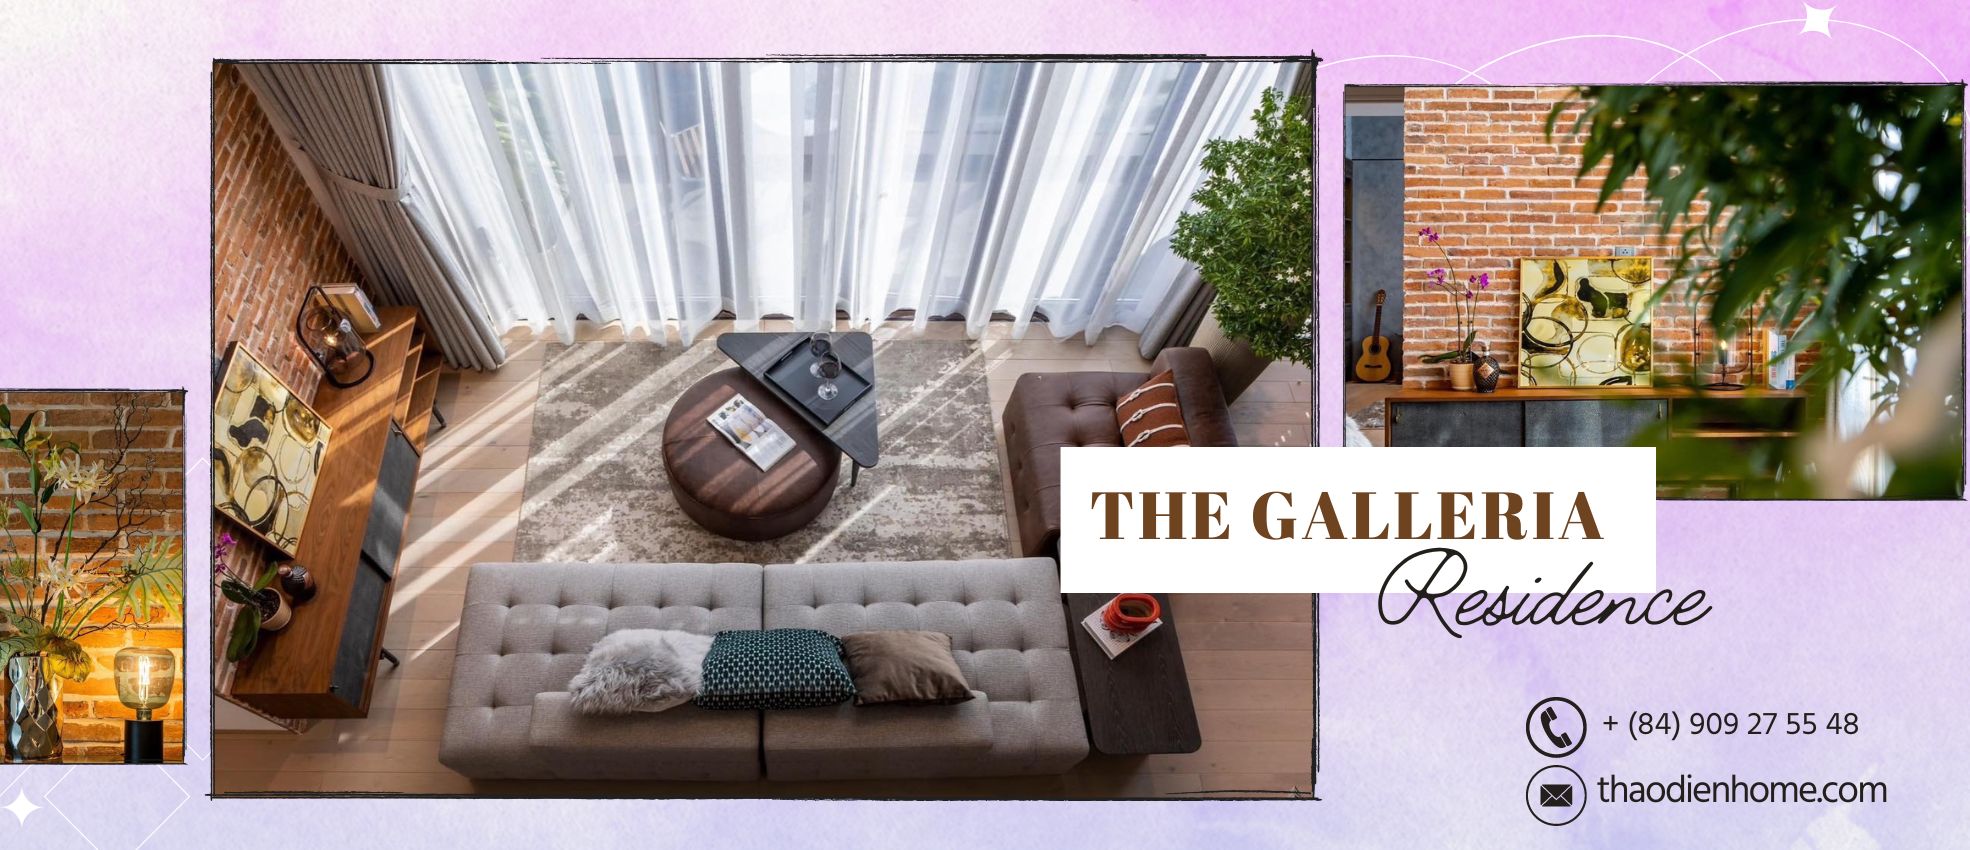 MTP G A12.12 homepage - Aesthetic & Luxurious 3BR in The Galleria Residence for Rent